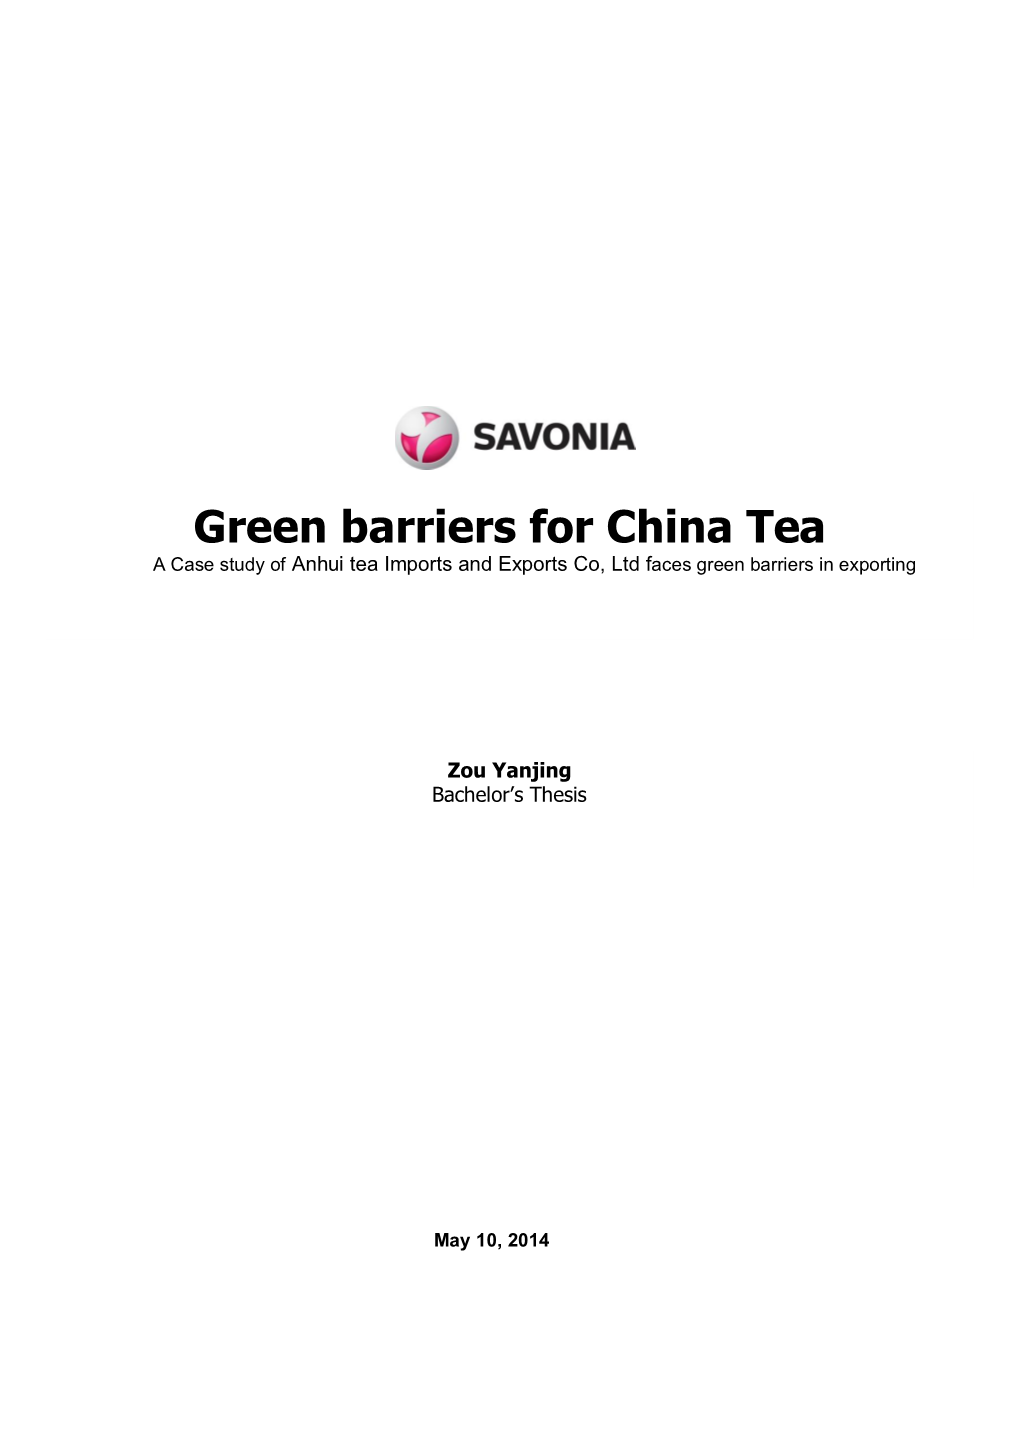 Green Barriers for China Tea a Case Study of Anhui Tea Imports and Exports Co, Ltd Faces Green Barriers in Exporting